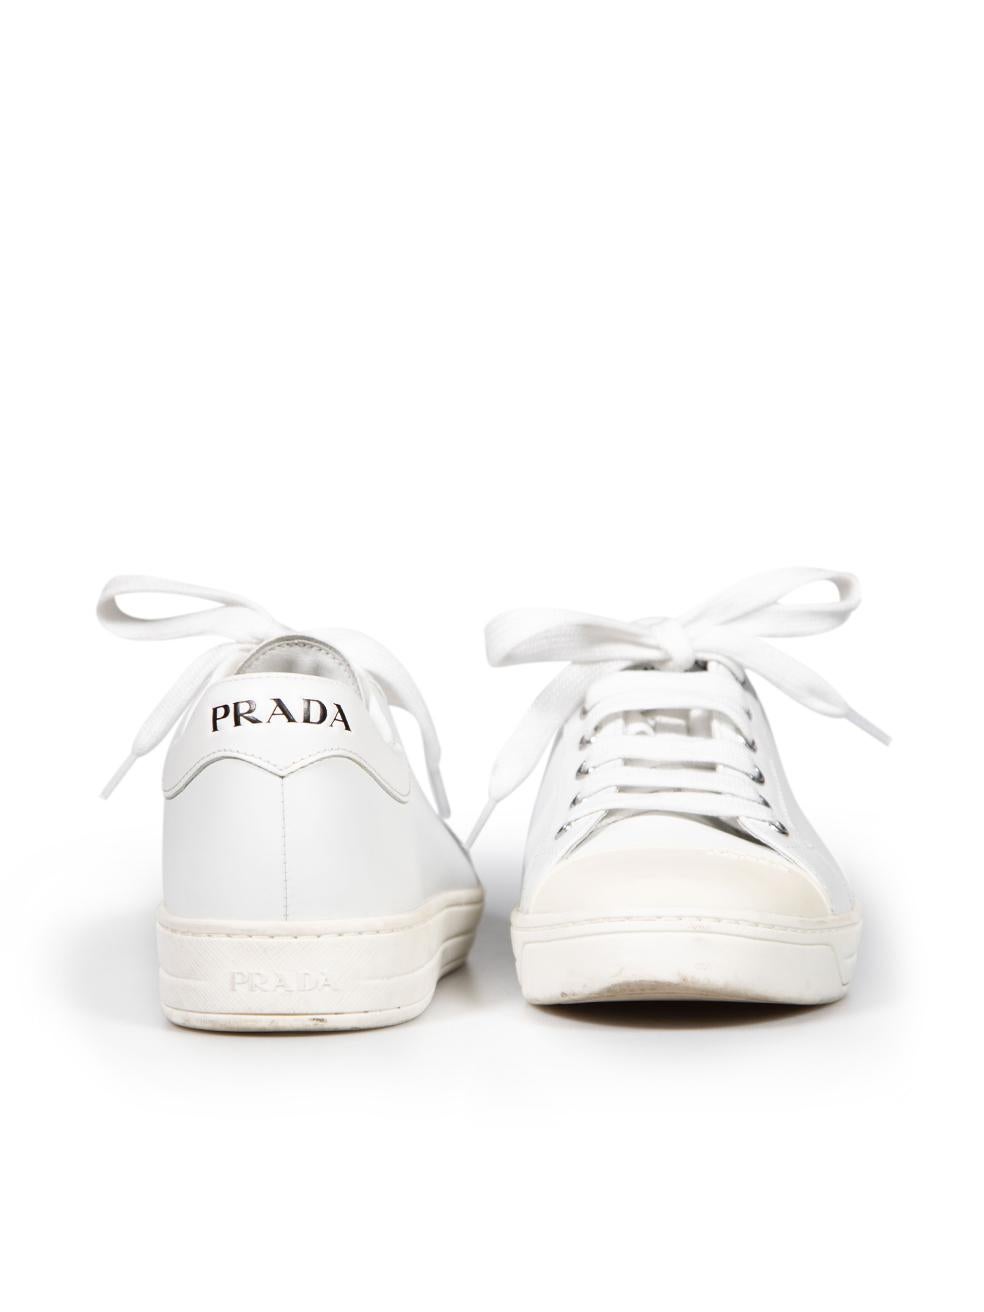 Prada White Leather Logo Trainers Size IT 37 In Excellent Condition For Sale In London, GB